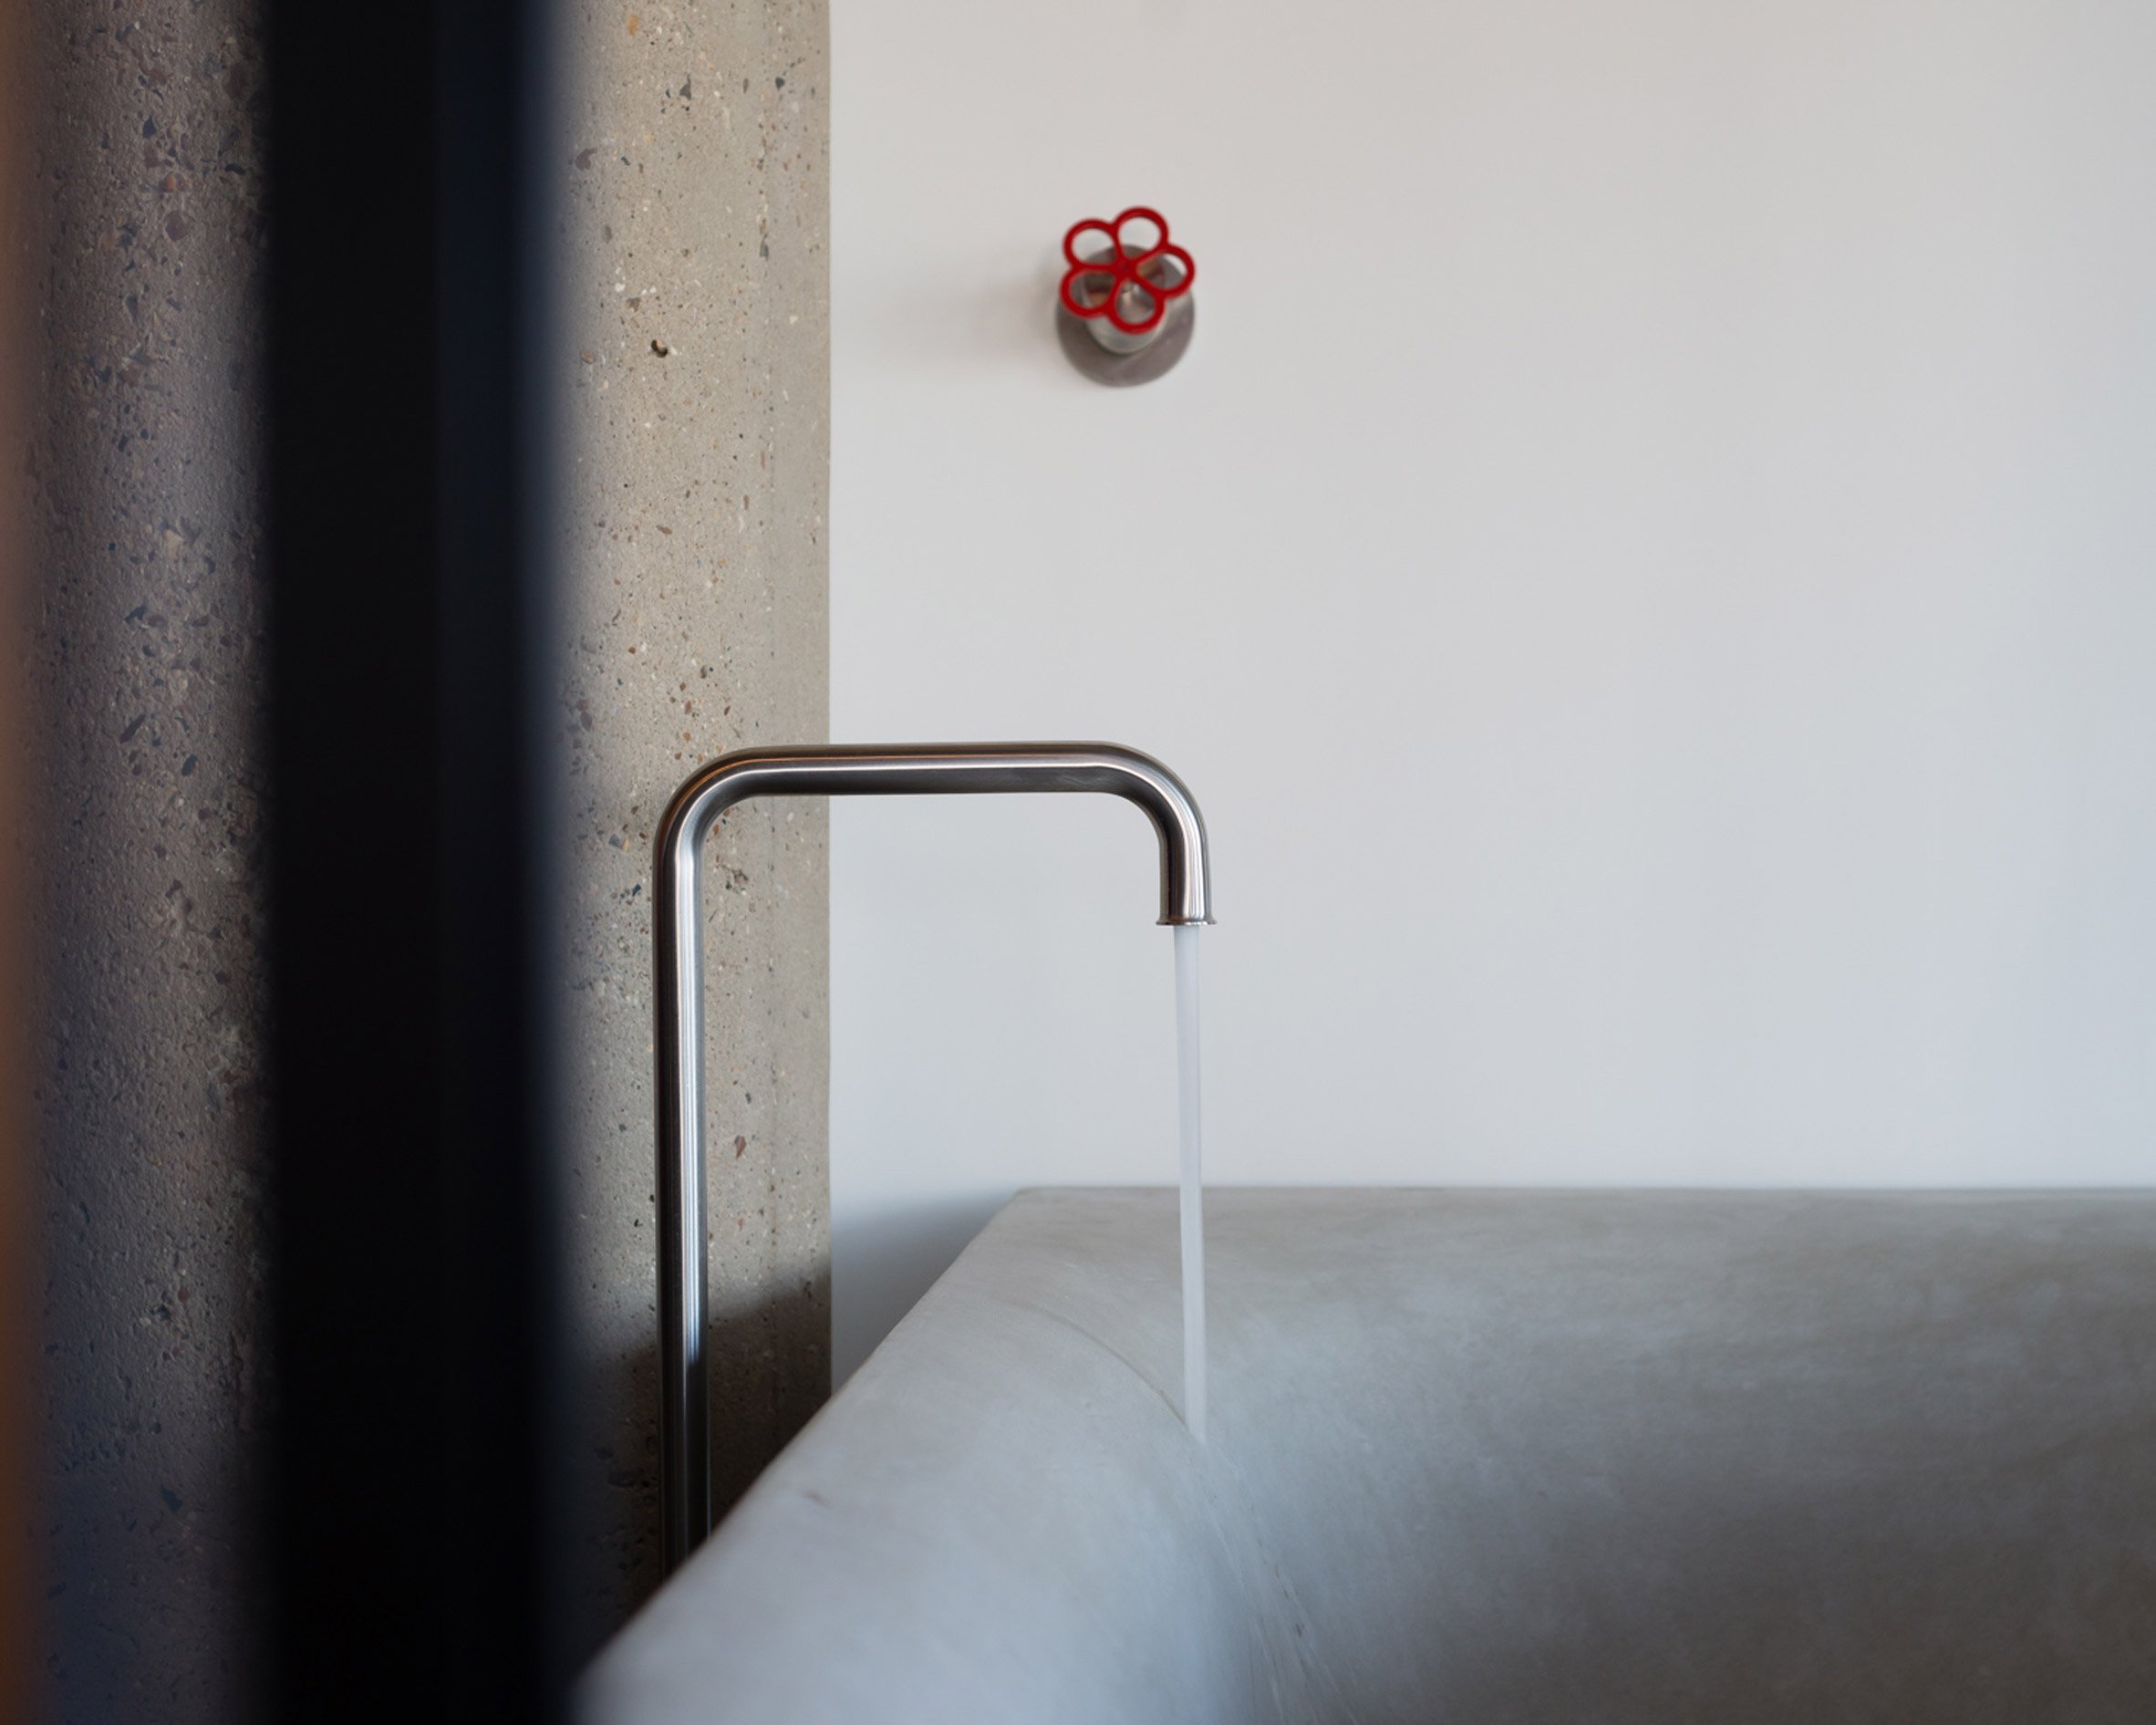 The flower shaped red faucets look cool and contrasting